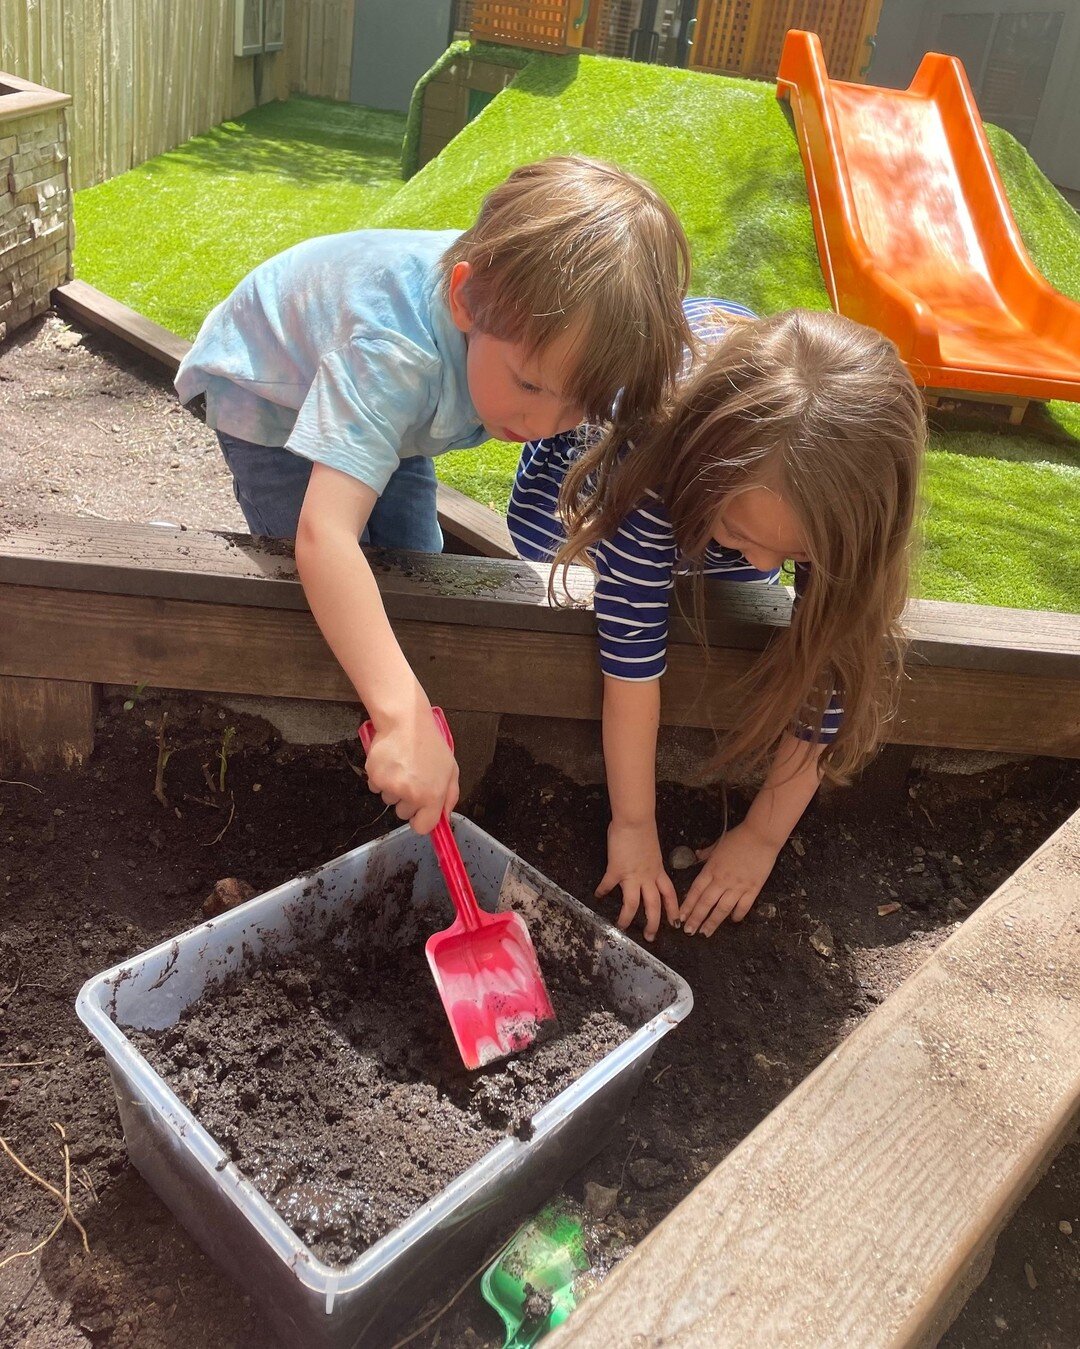 Students get their hands dirty as they explore what&rsquo;s beneath the dirt! They worked as a team using shovels and buckets to collect their findings! &ldquo;Look at this root we found! It&rsquo;s so long. I think it&rsquo;s from a sunflower!&rdquo